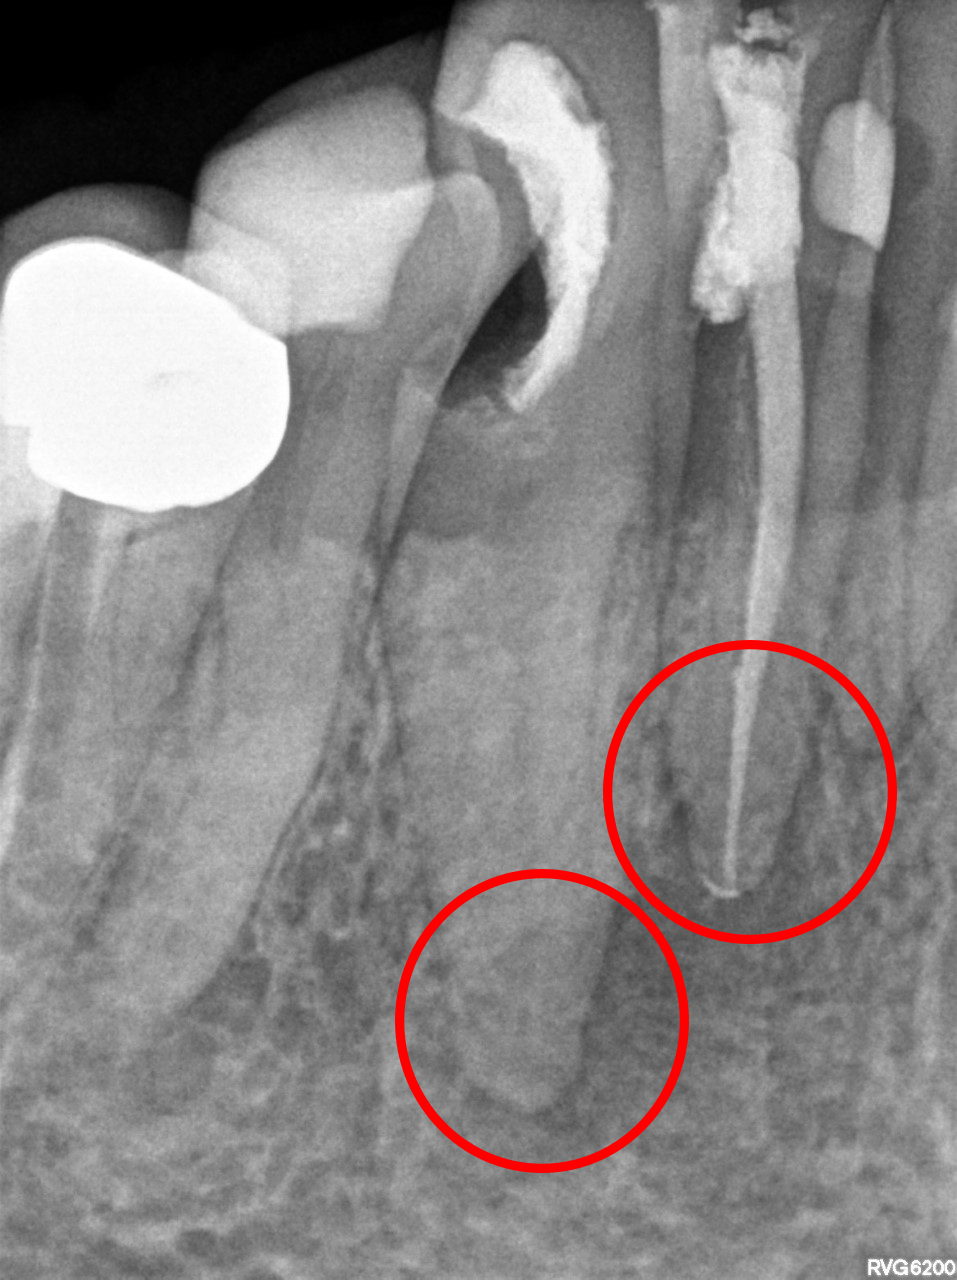 X-Rays of Teeth With Abscess